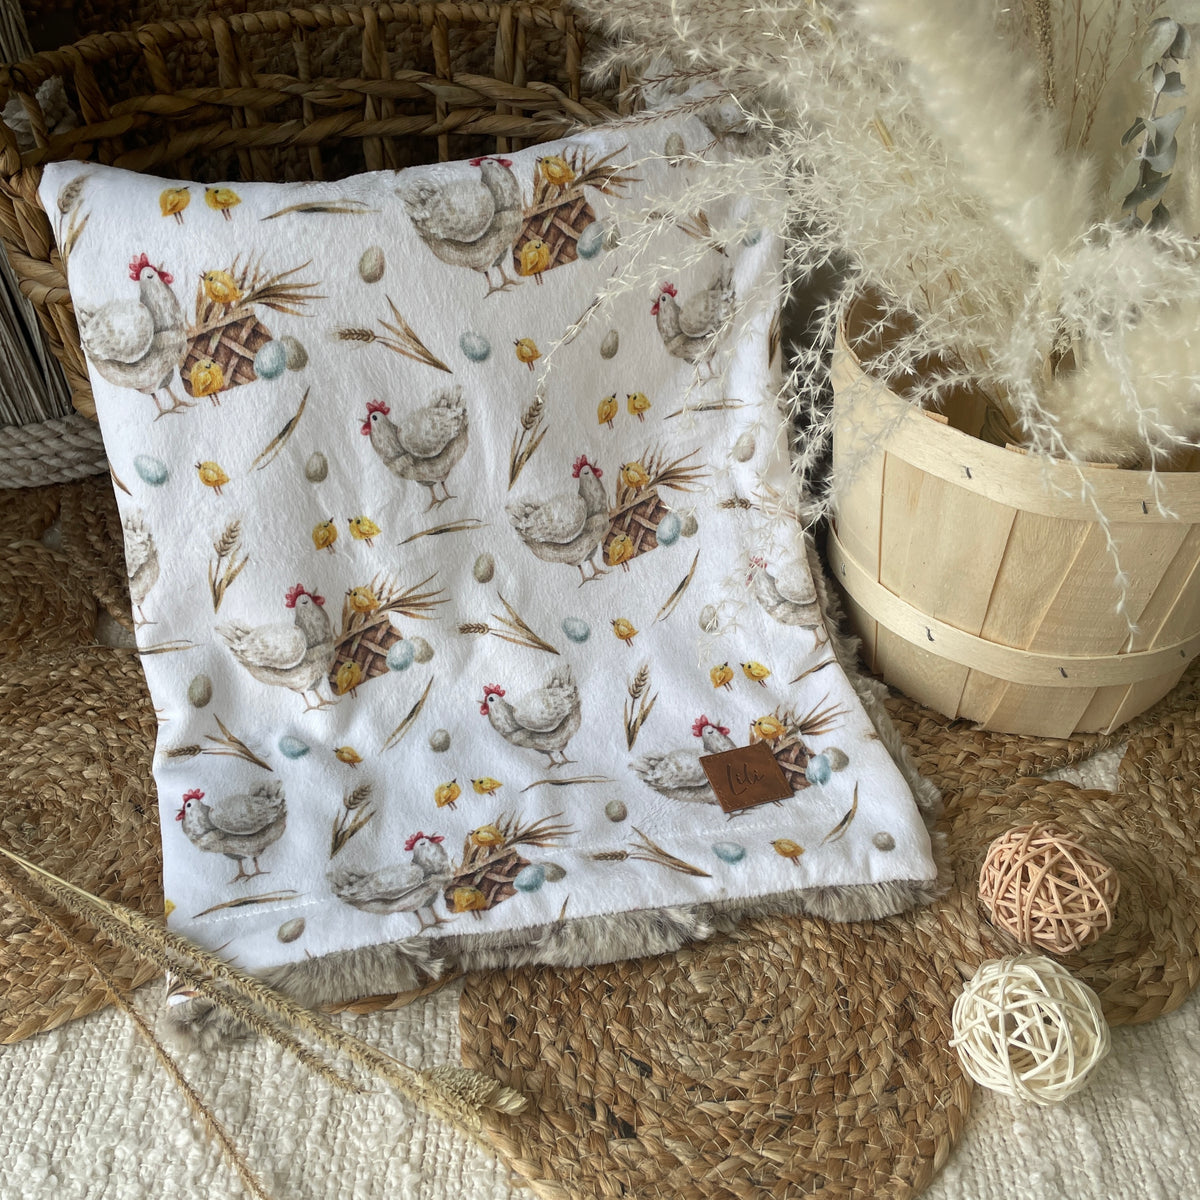 Simple comforter ready to go | A hen and her eggs [Minky/Faux Fur]